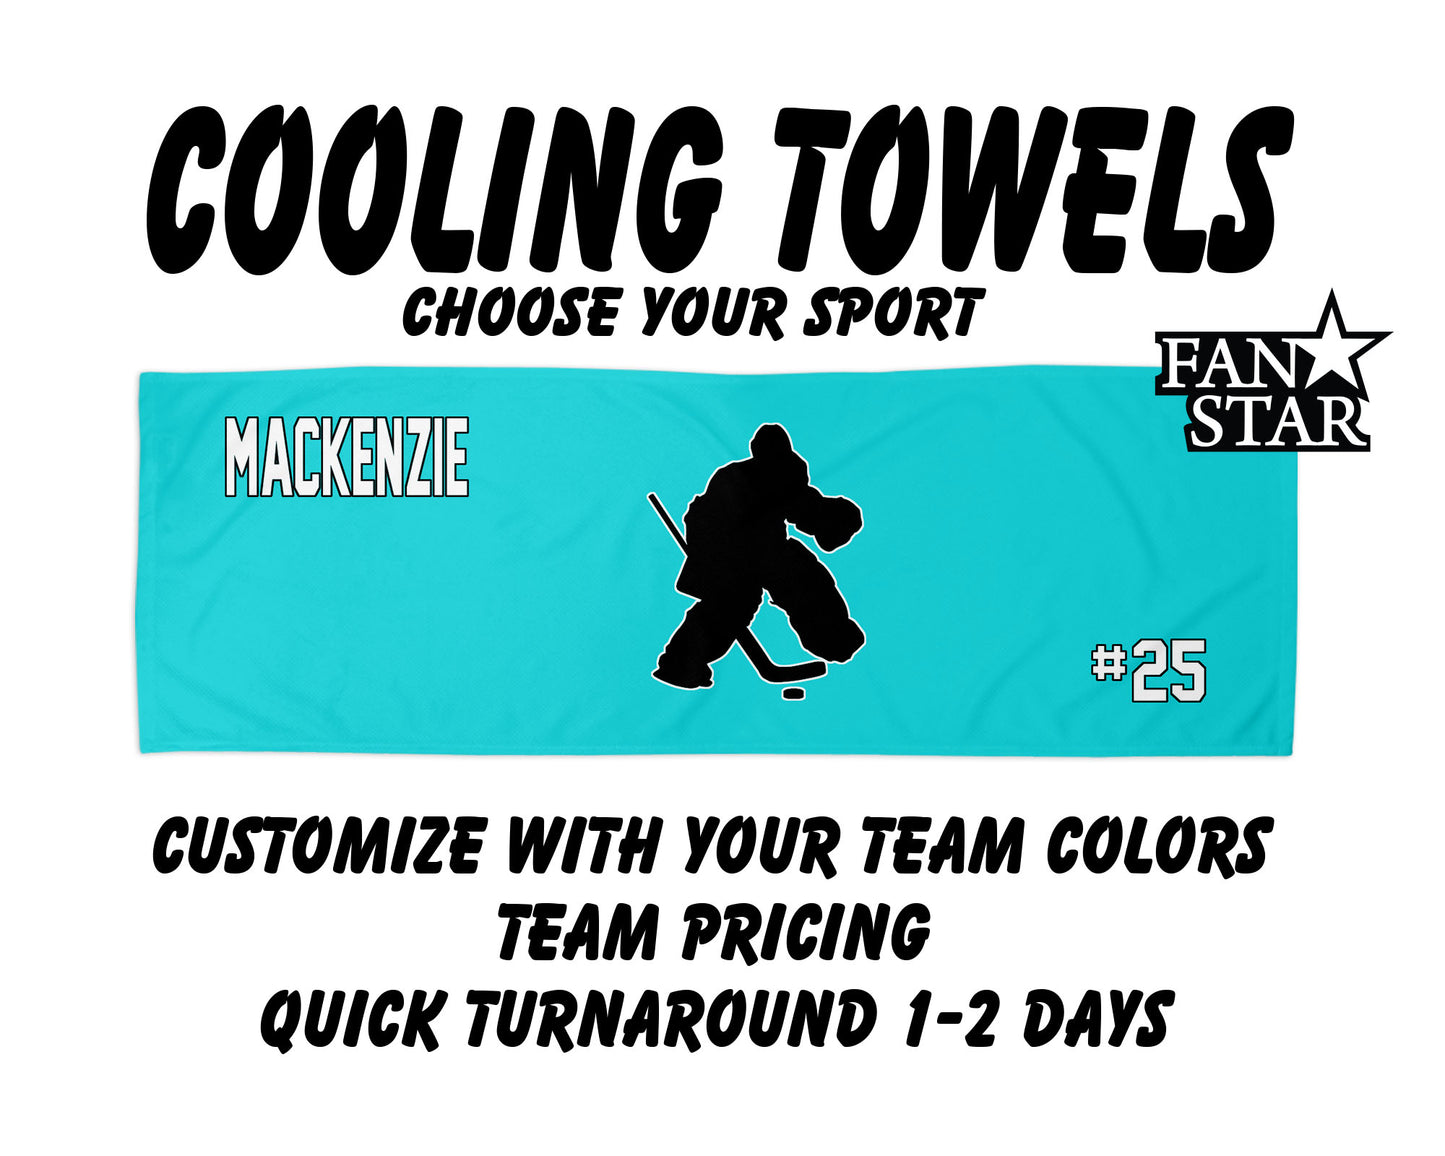 Hockey Cooling Towel with Solid Color Background